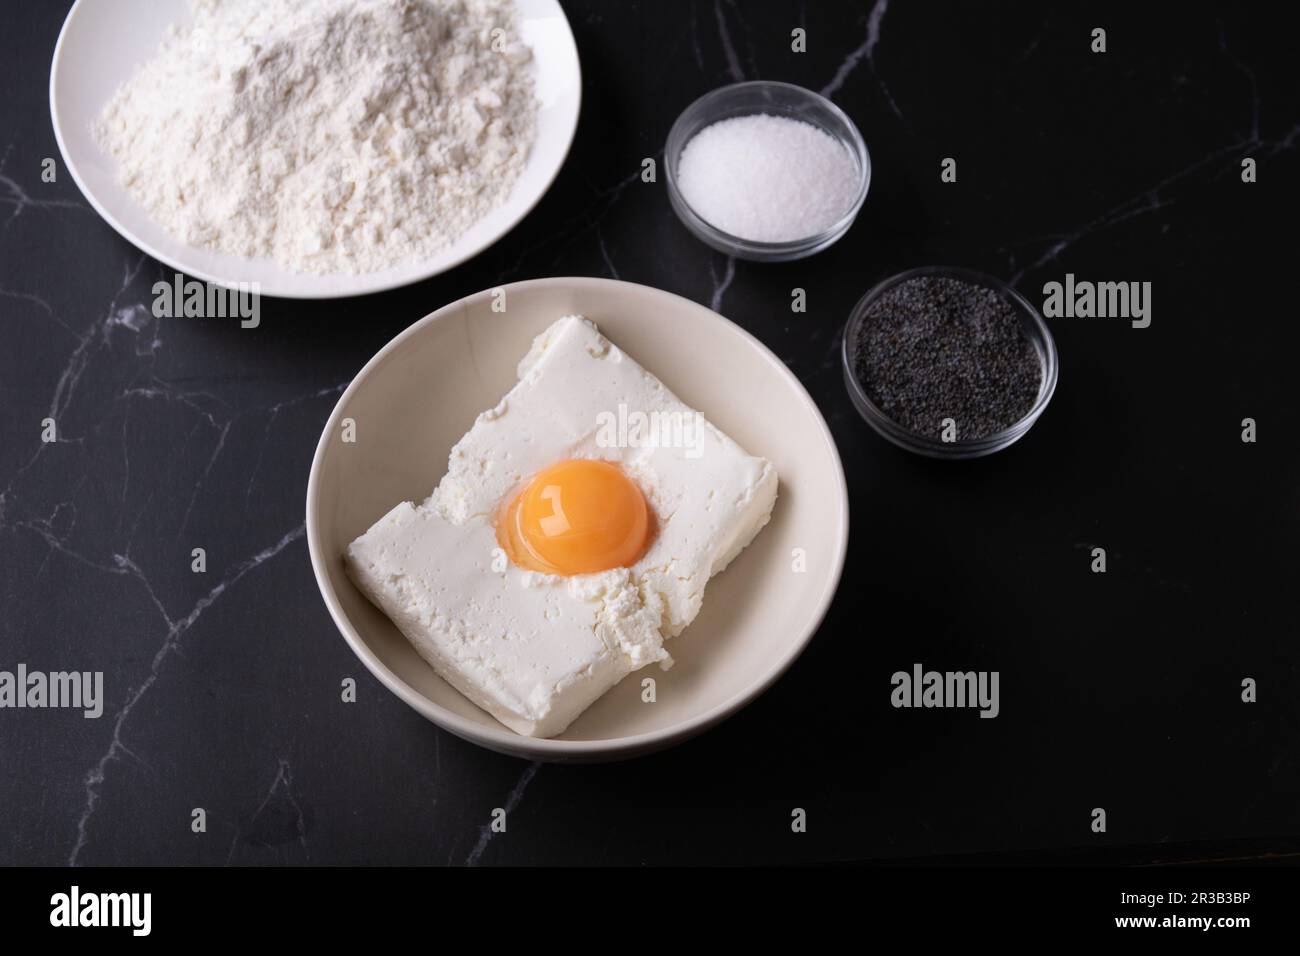 photo yolk from an egg, sugar, cottage cheese, poppy seed on a dark background Stock Photo